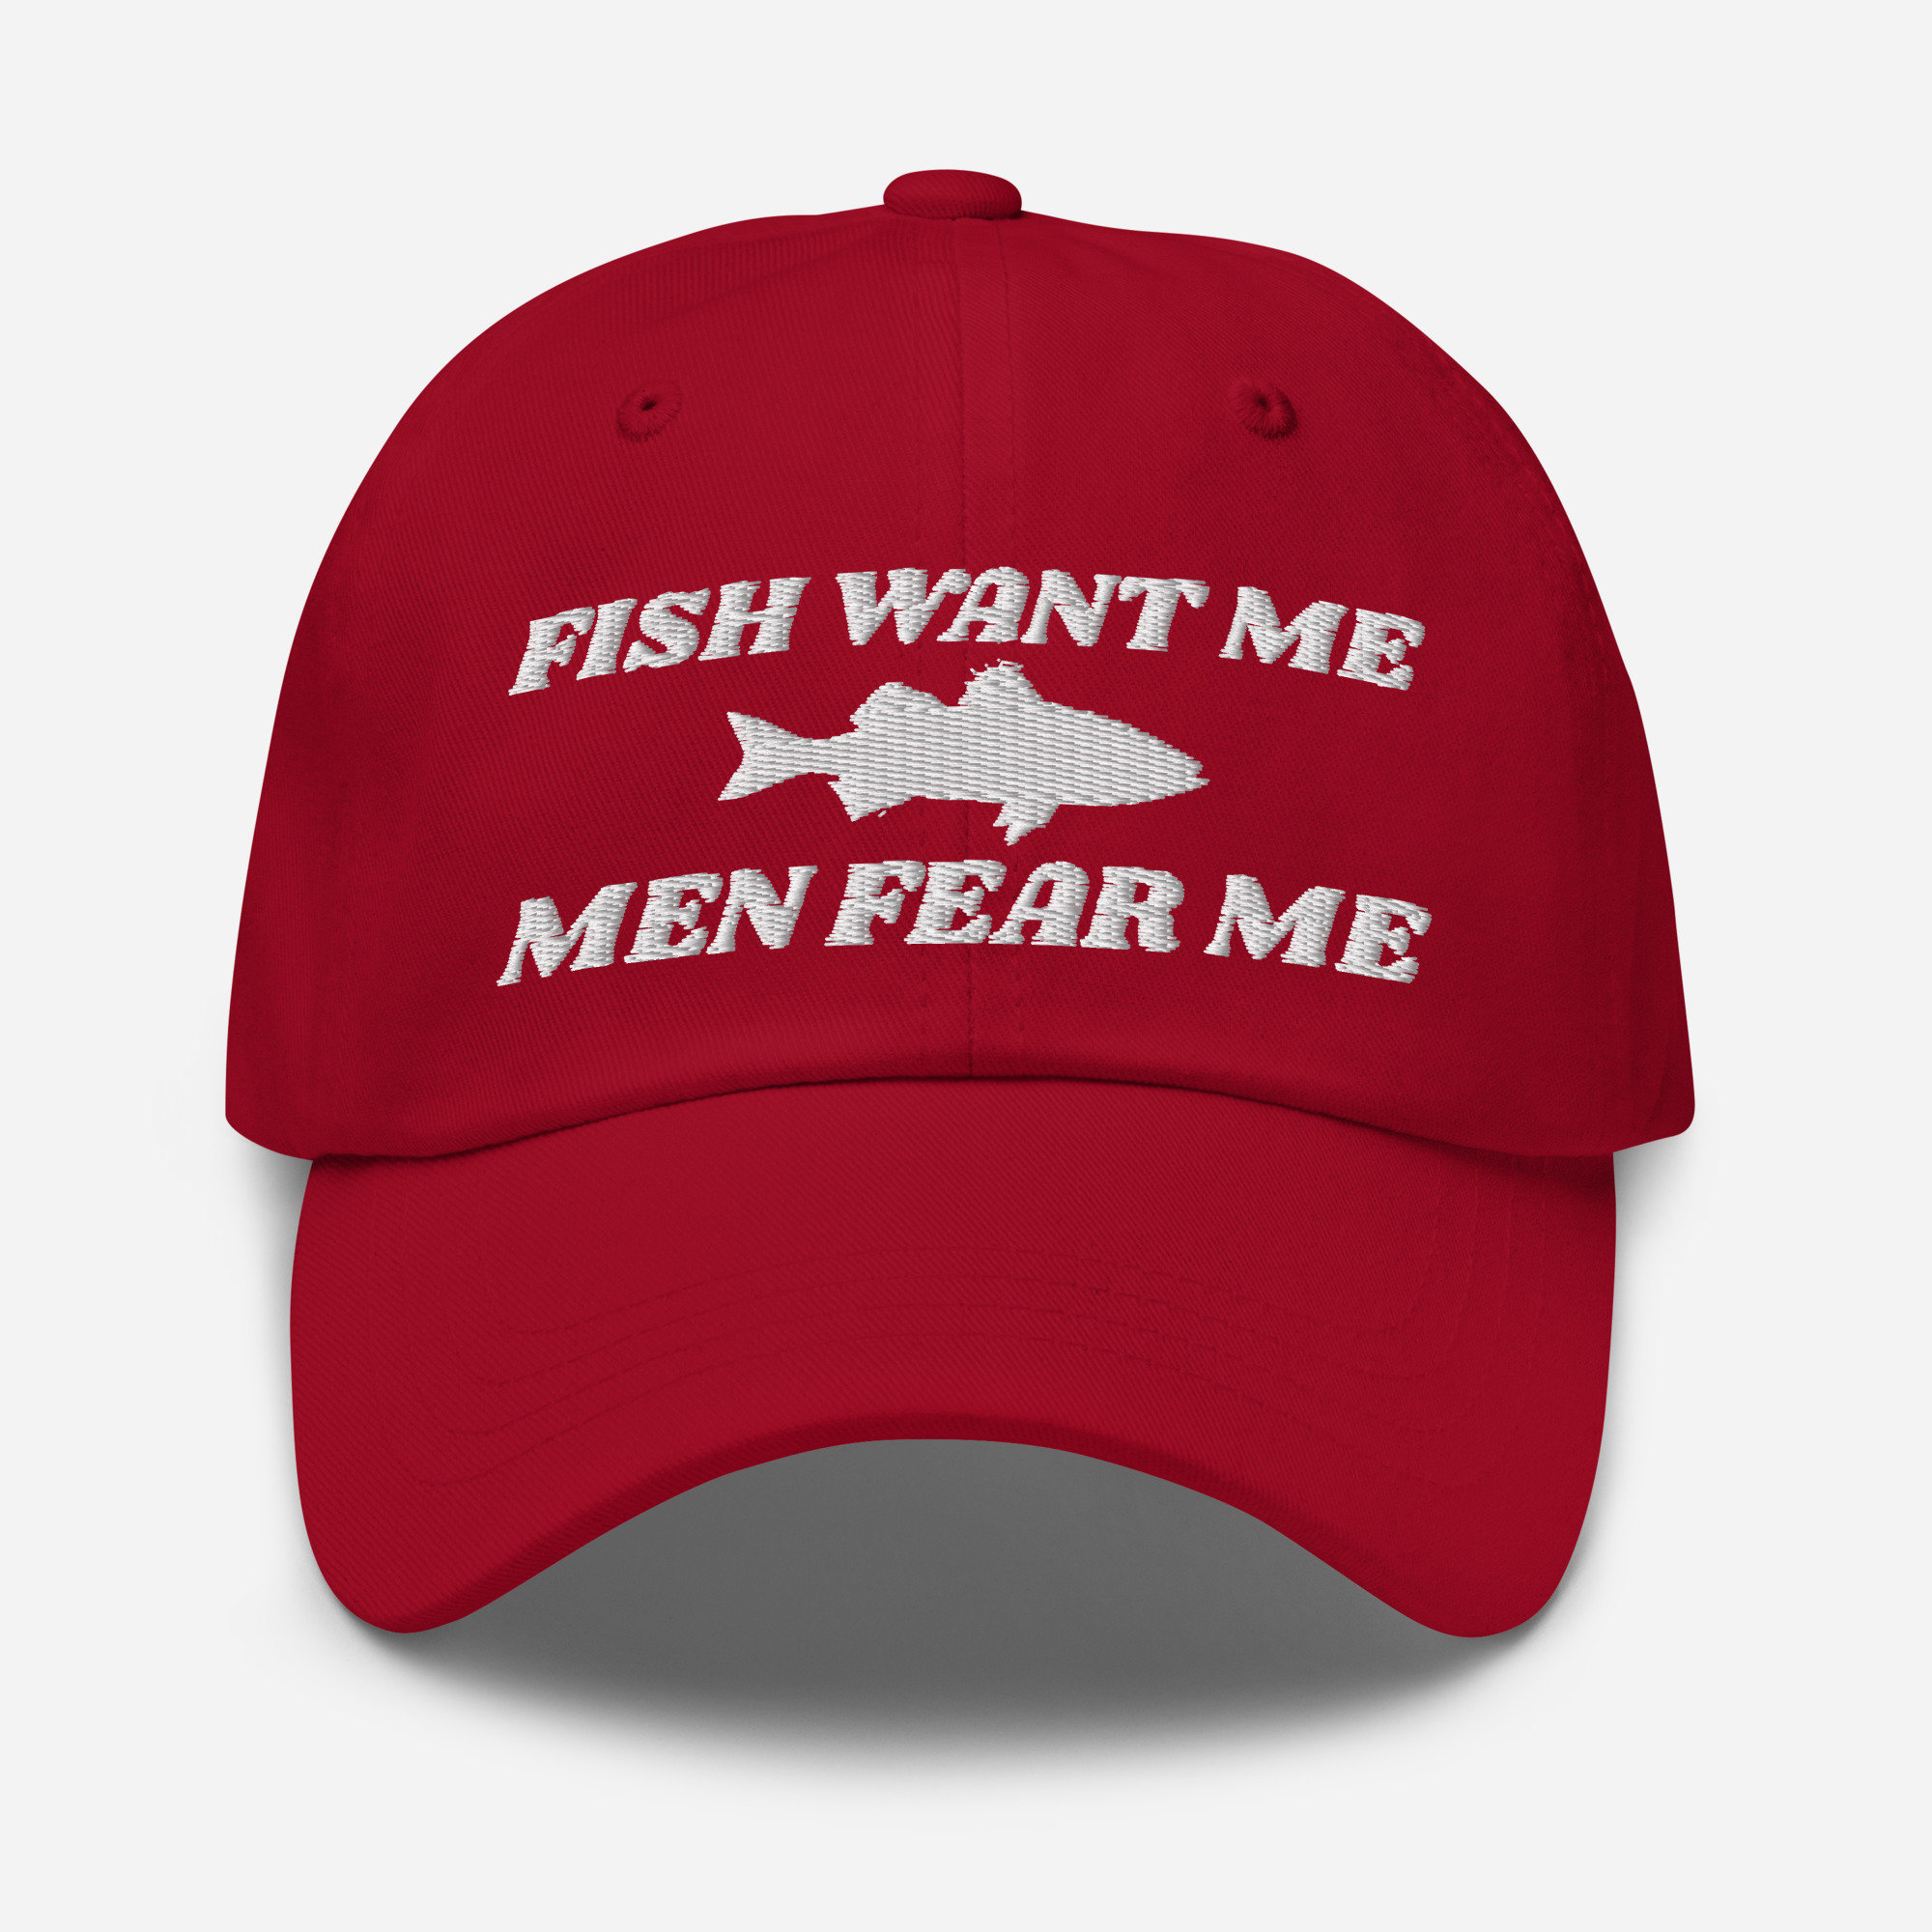 Fish Want Me - Men Fear Me - Embroidered Funny Fishing Lovers Dad Hat Cap Design, Fishing Lovers Funny Gift, Meme Gift Hat Cap